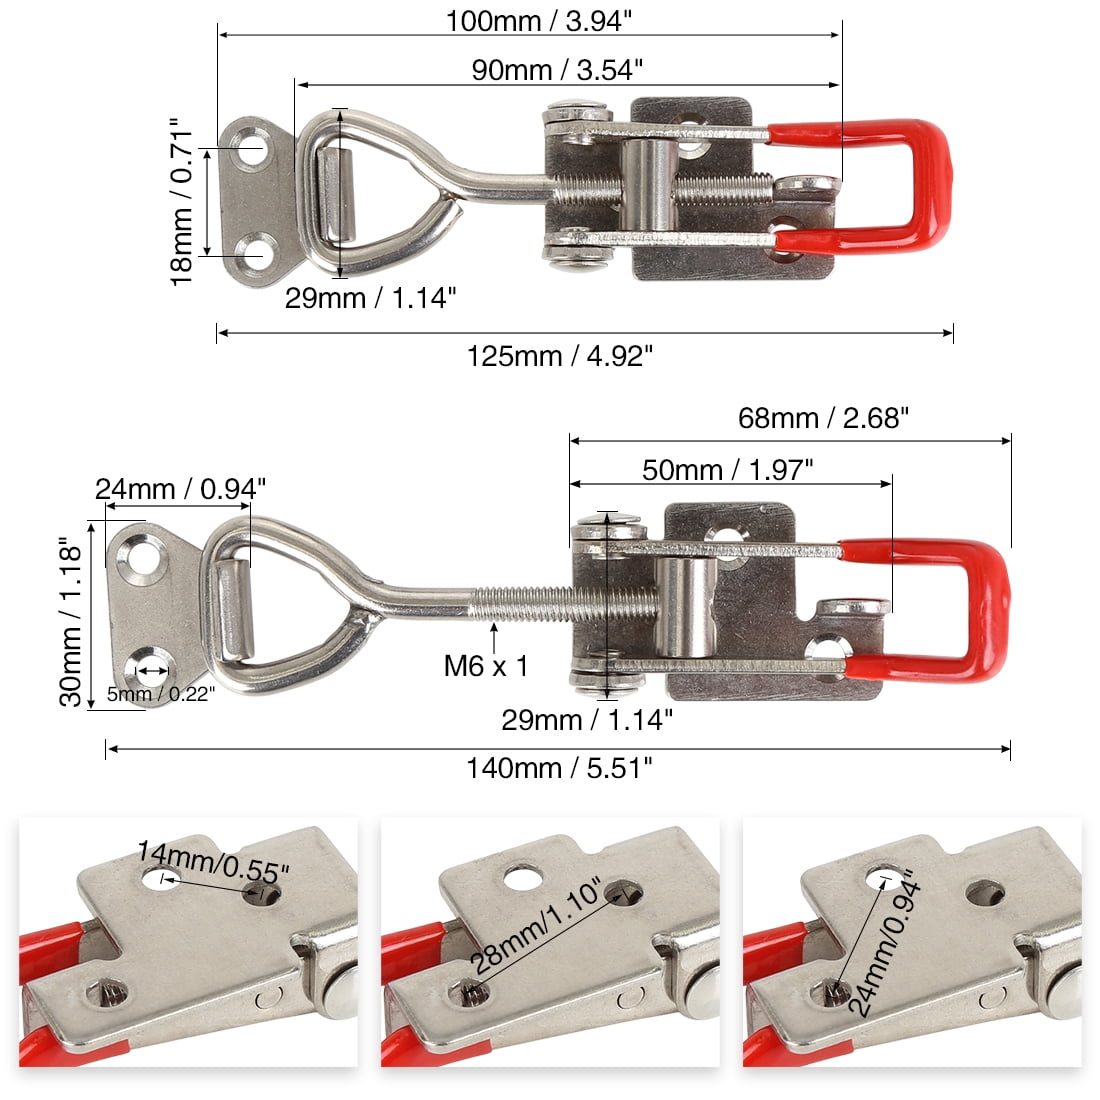 X AUTOHAUX Car Adjustable Pull Latch Toggle Latch Clamp Hasp with Hole 300Kg 660Lbs Holding Capacity 4pcs 